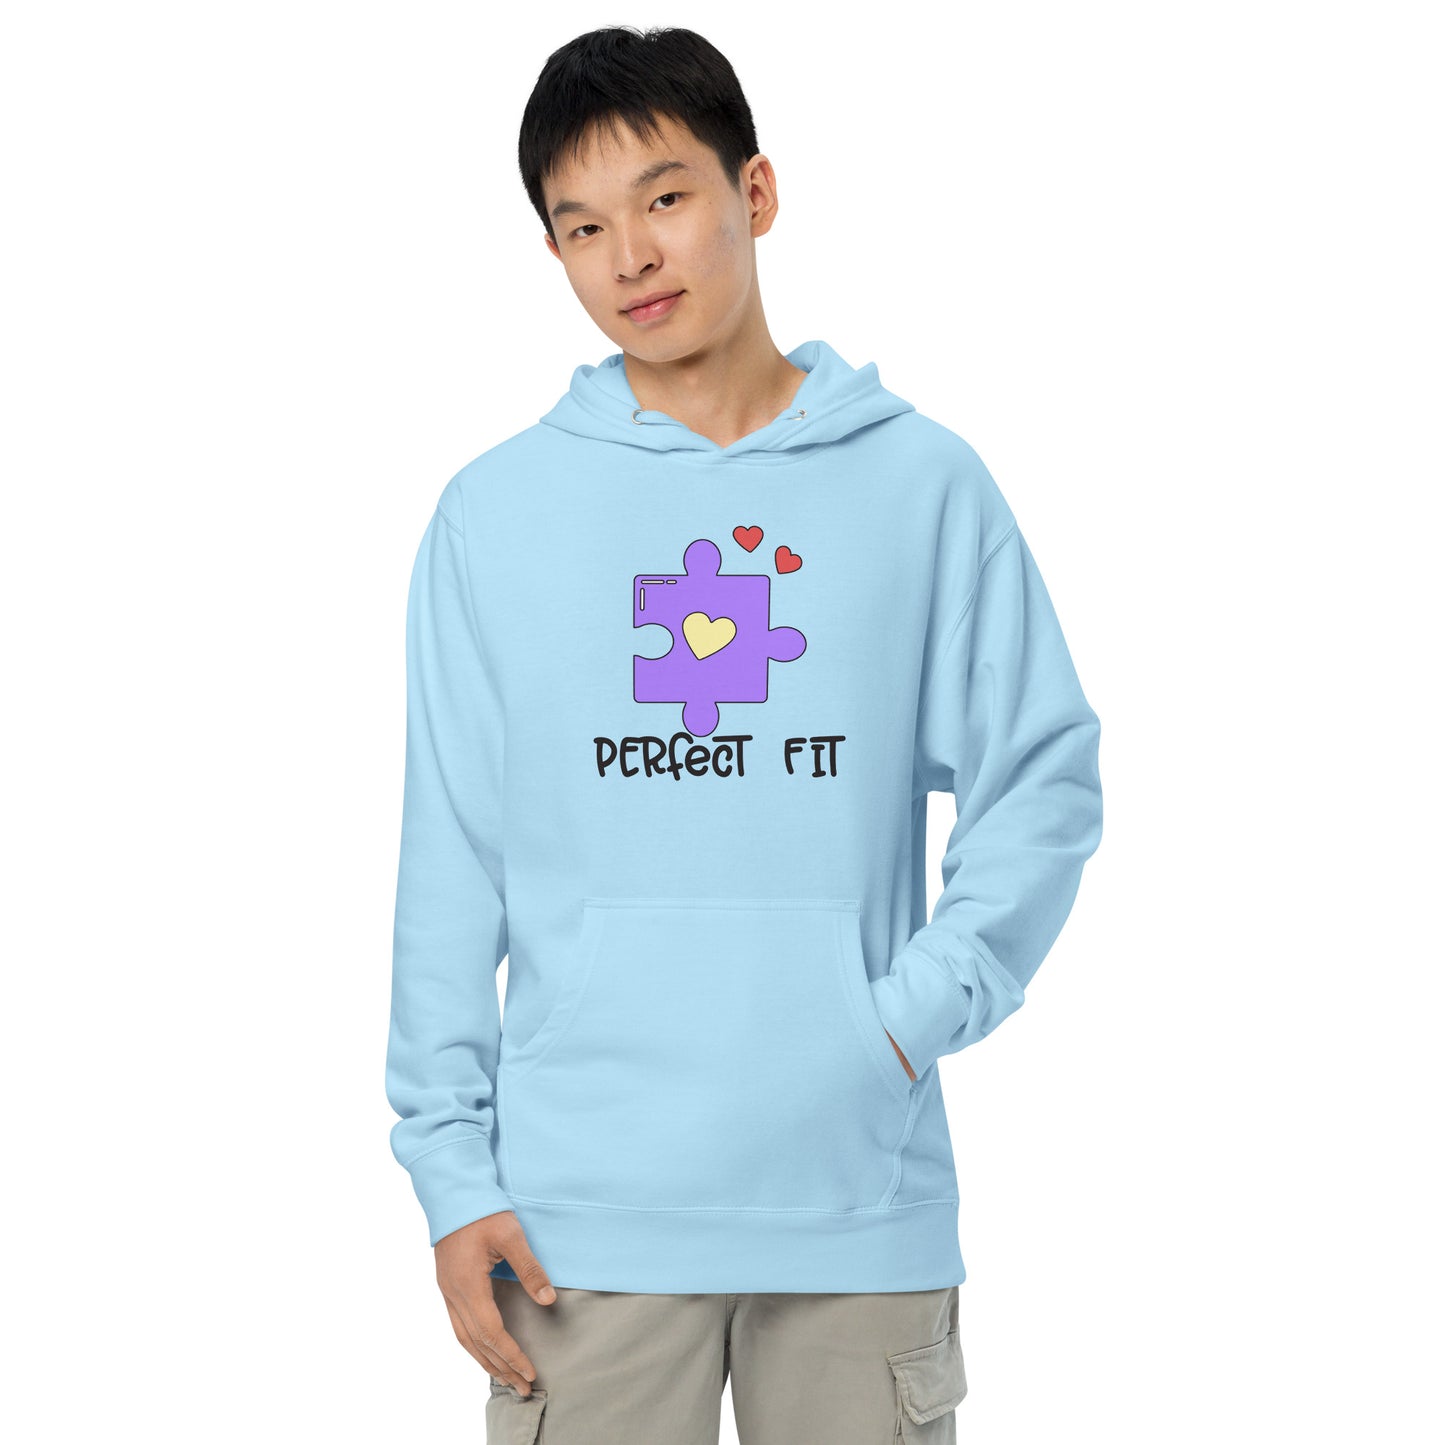 Adult 'Perfect Fit Purple Piece' Midweight Hoodie